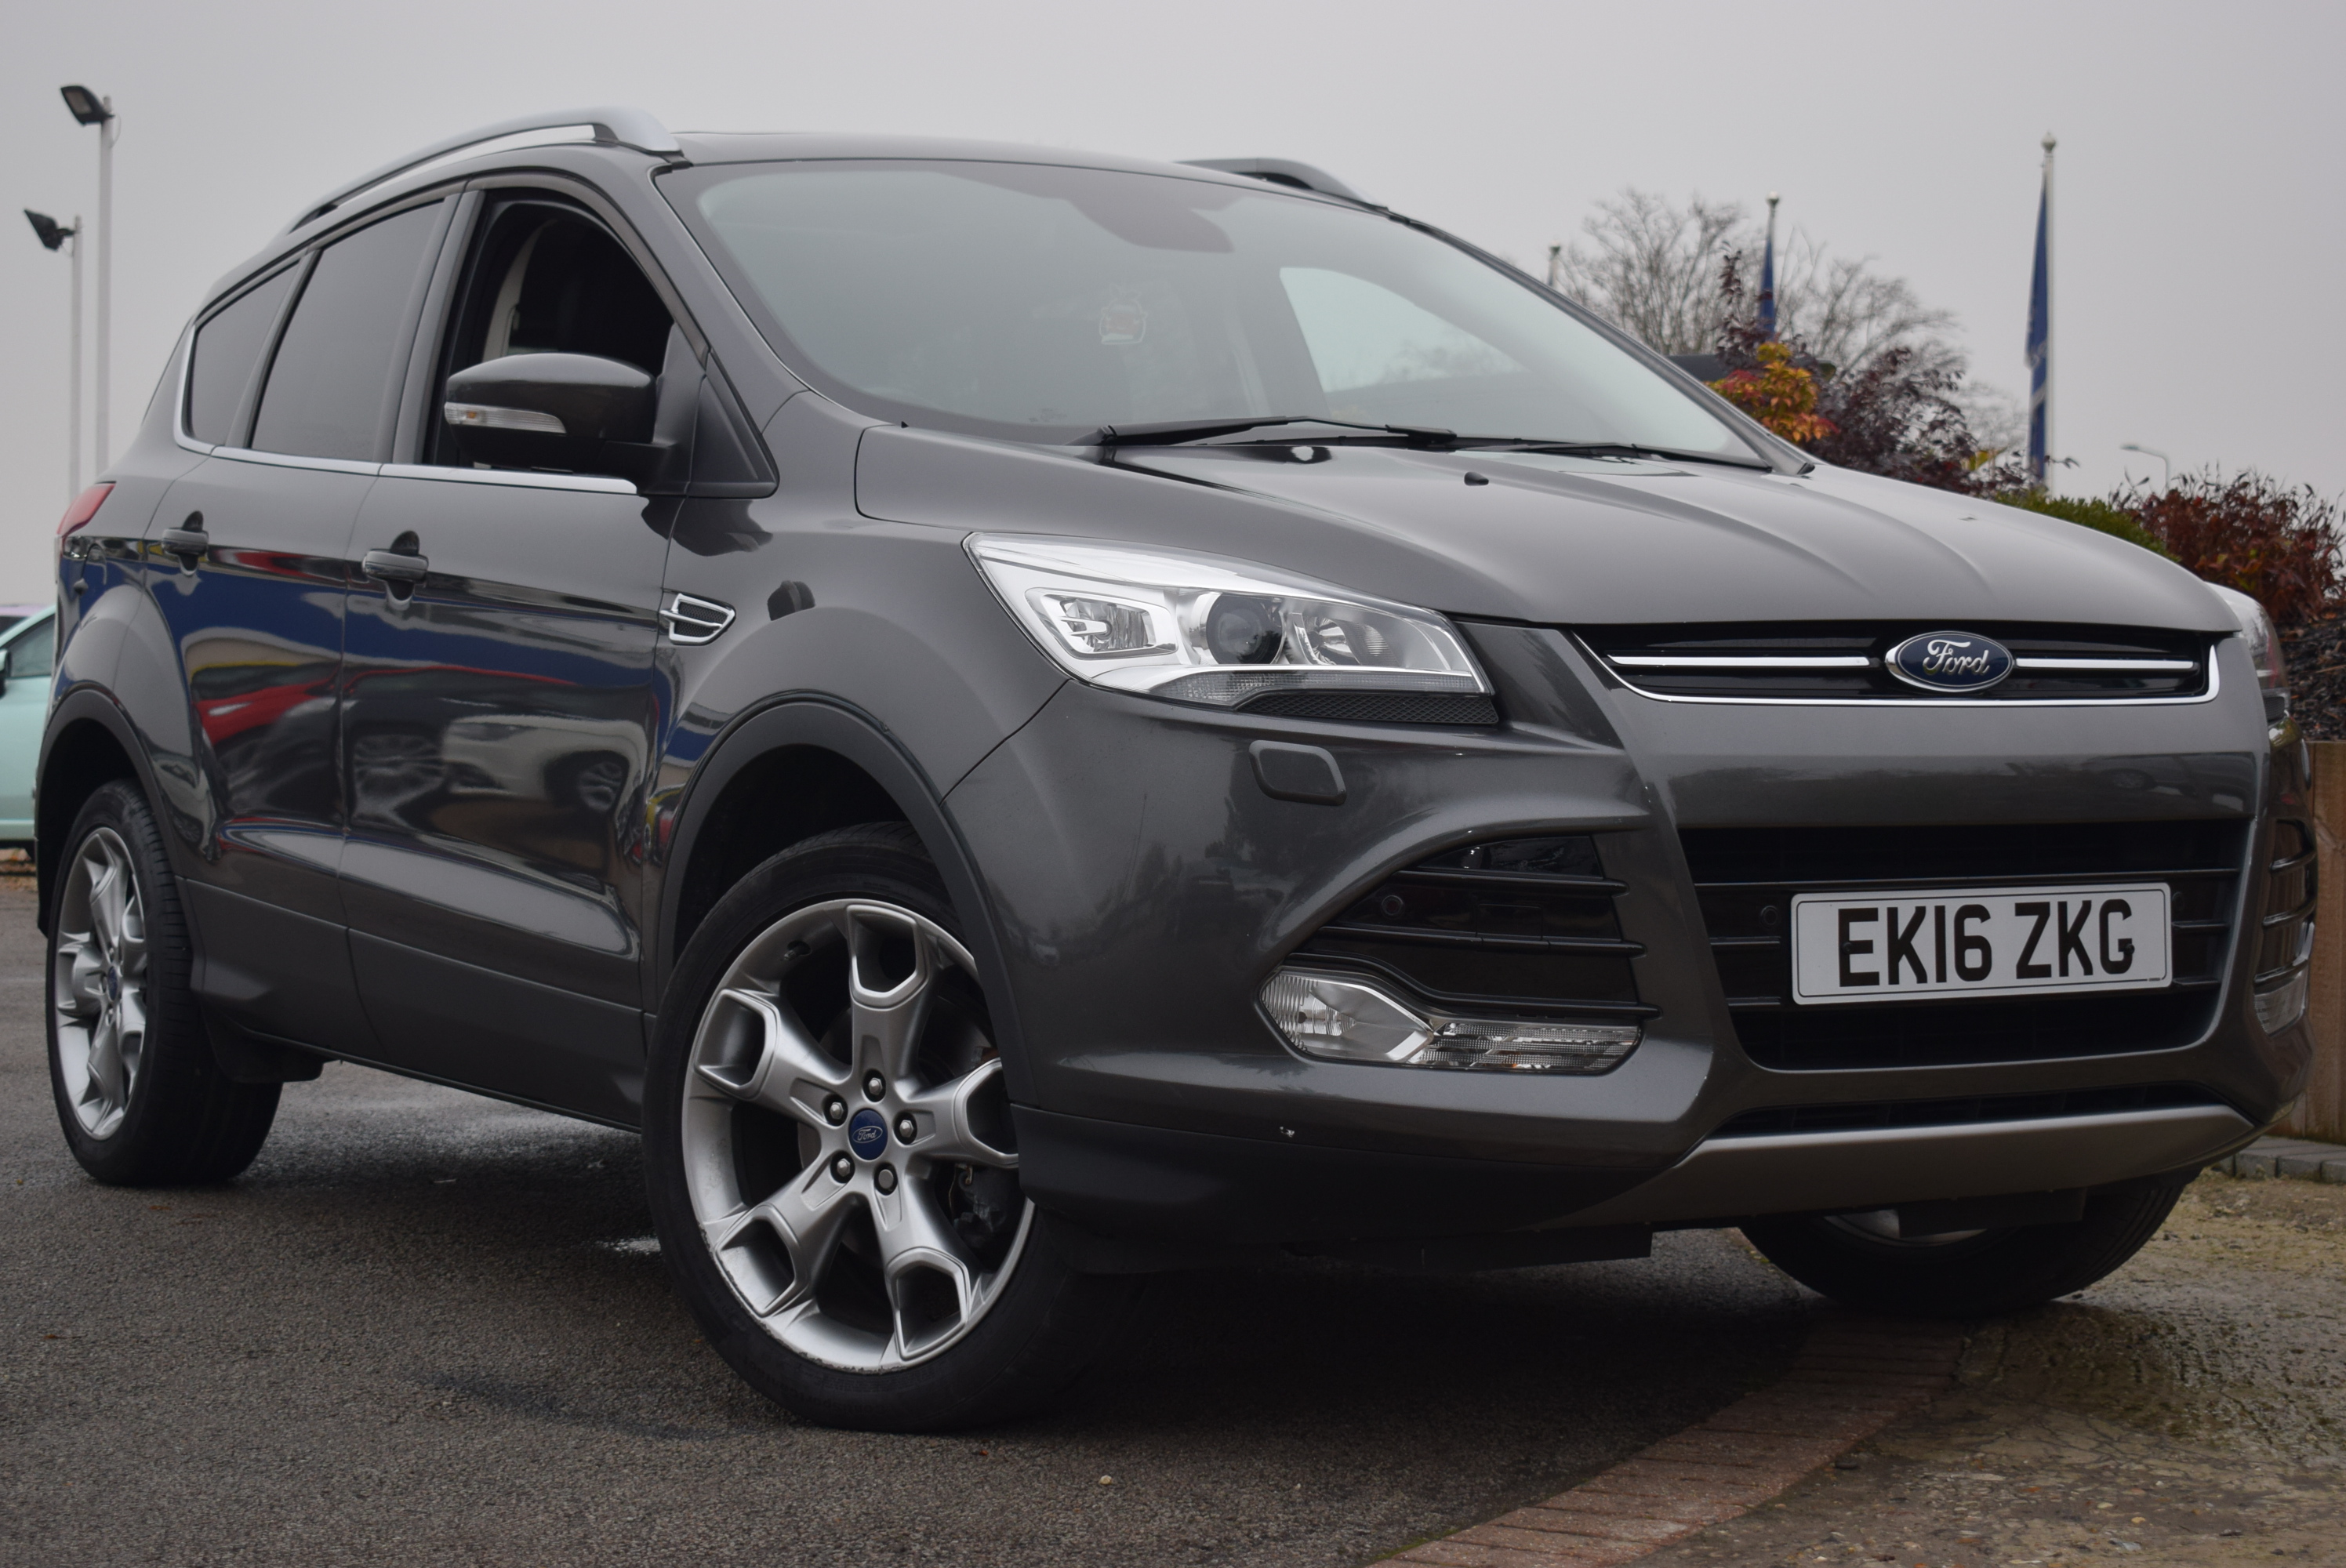 FORD KUGA 1.5 EcoBoost 182 Titanium X 5dr Auto For Sale